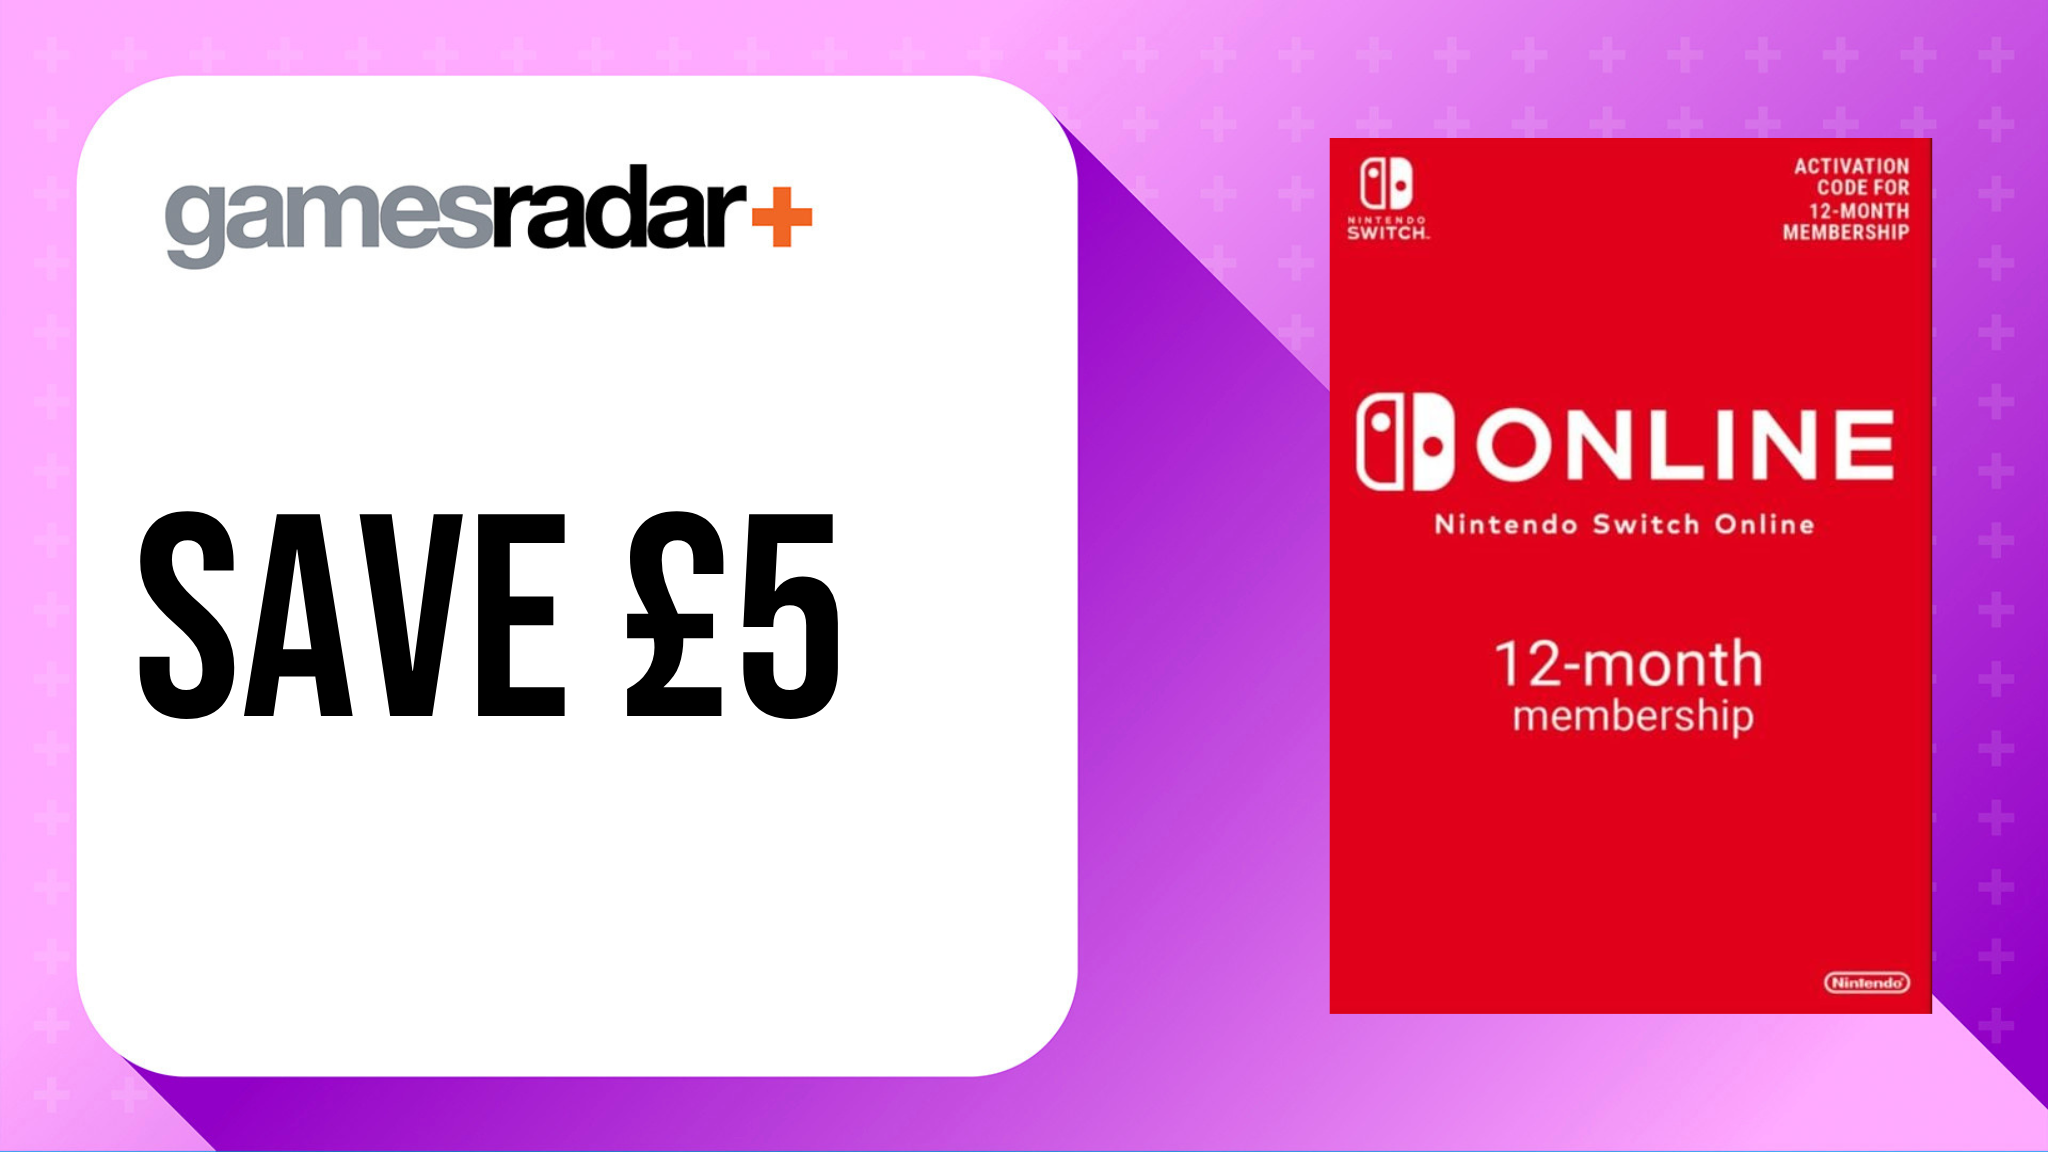 Nintendo Switch Online Deal image with £5 saving and purple background